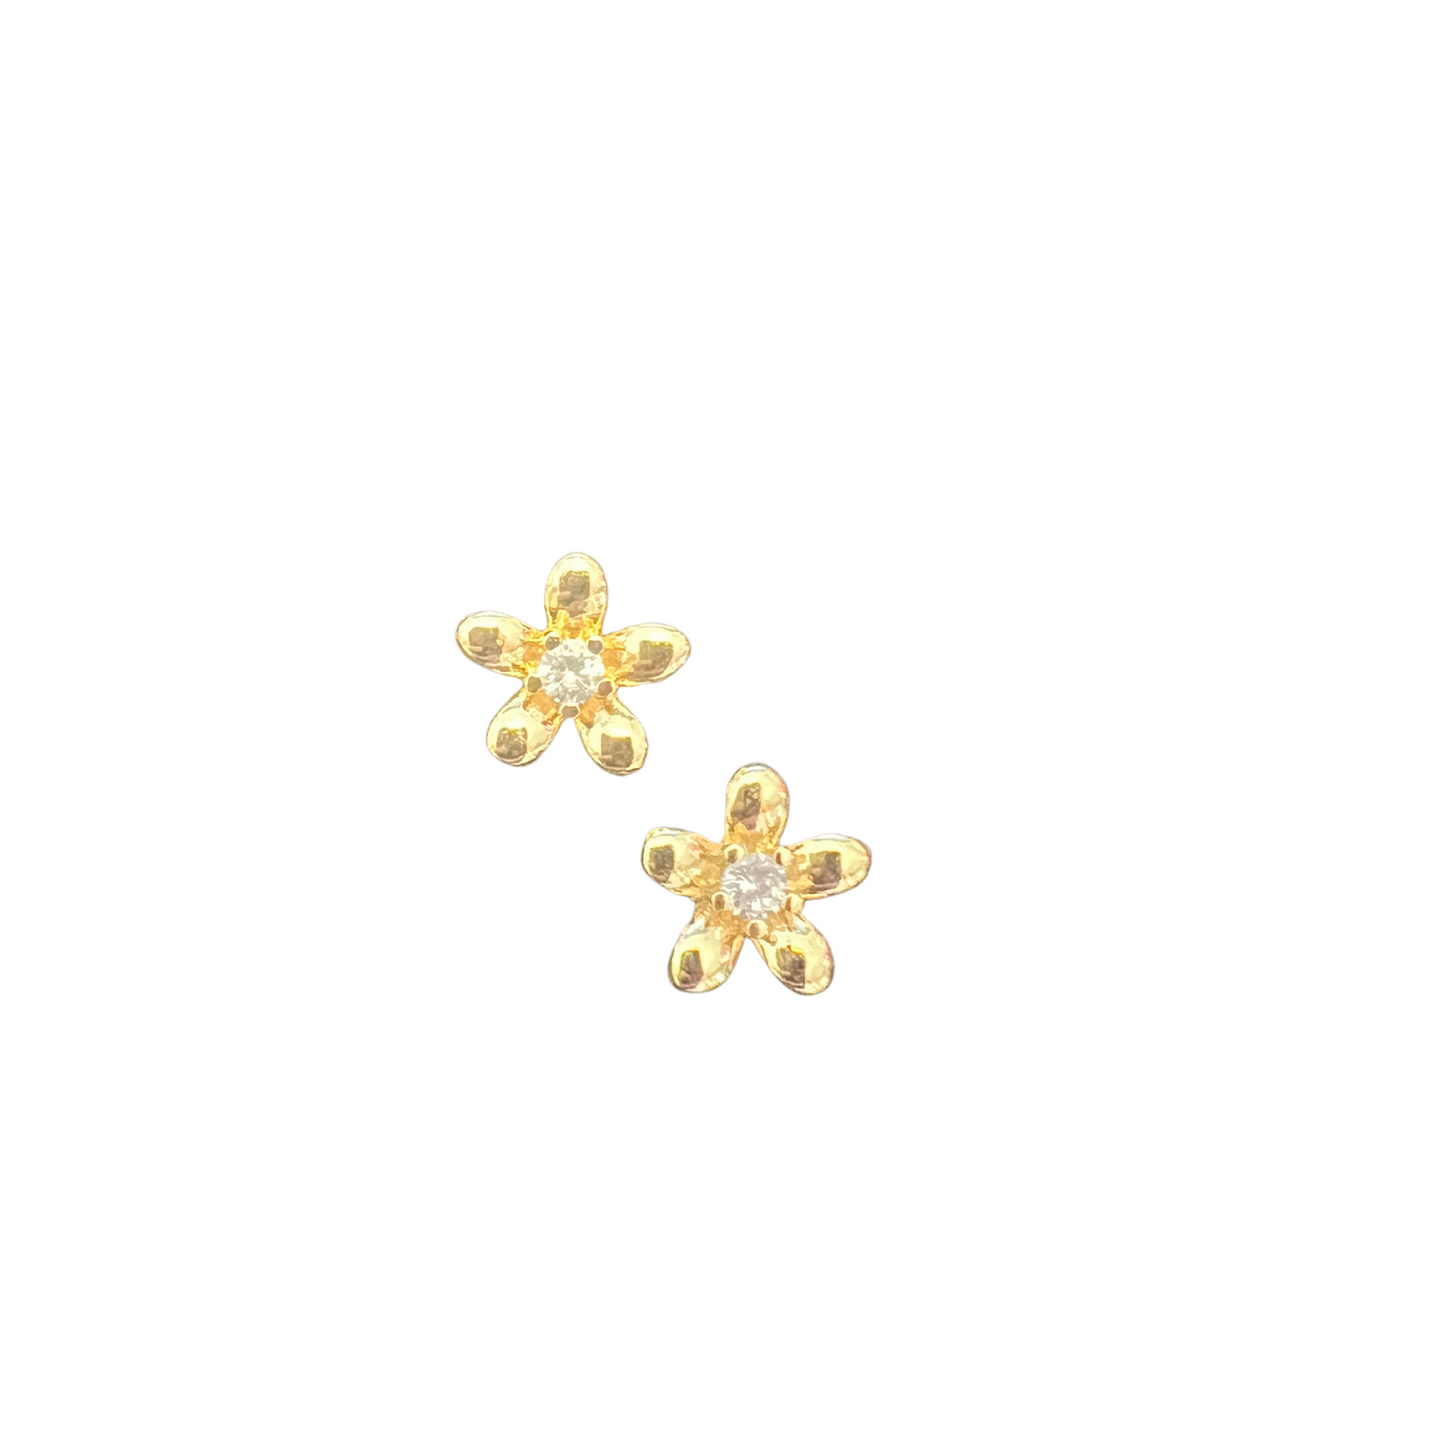 These beautiful flower shaped stud earrings are the perfect addition to your outfit. Stylish and eye-catching, these studs boast a combination of gold color and rhinestone accents. The perfect balance of elegance and sparkle create an impressive and unique look.